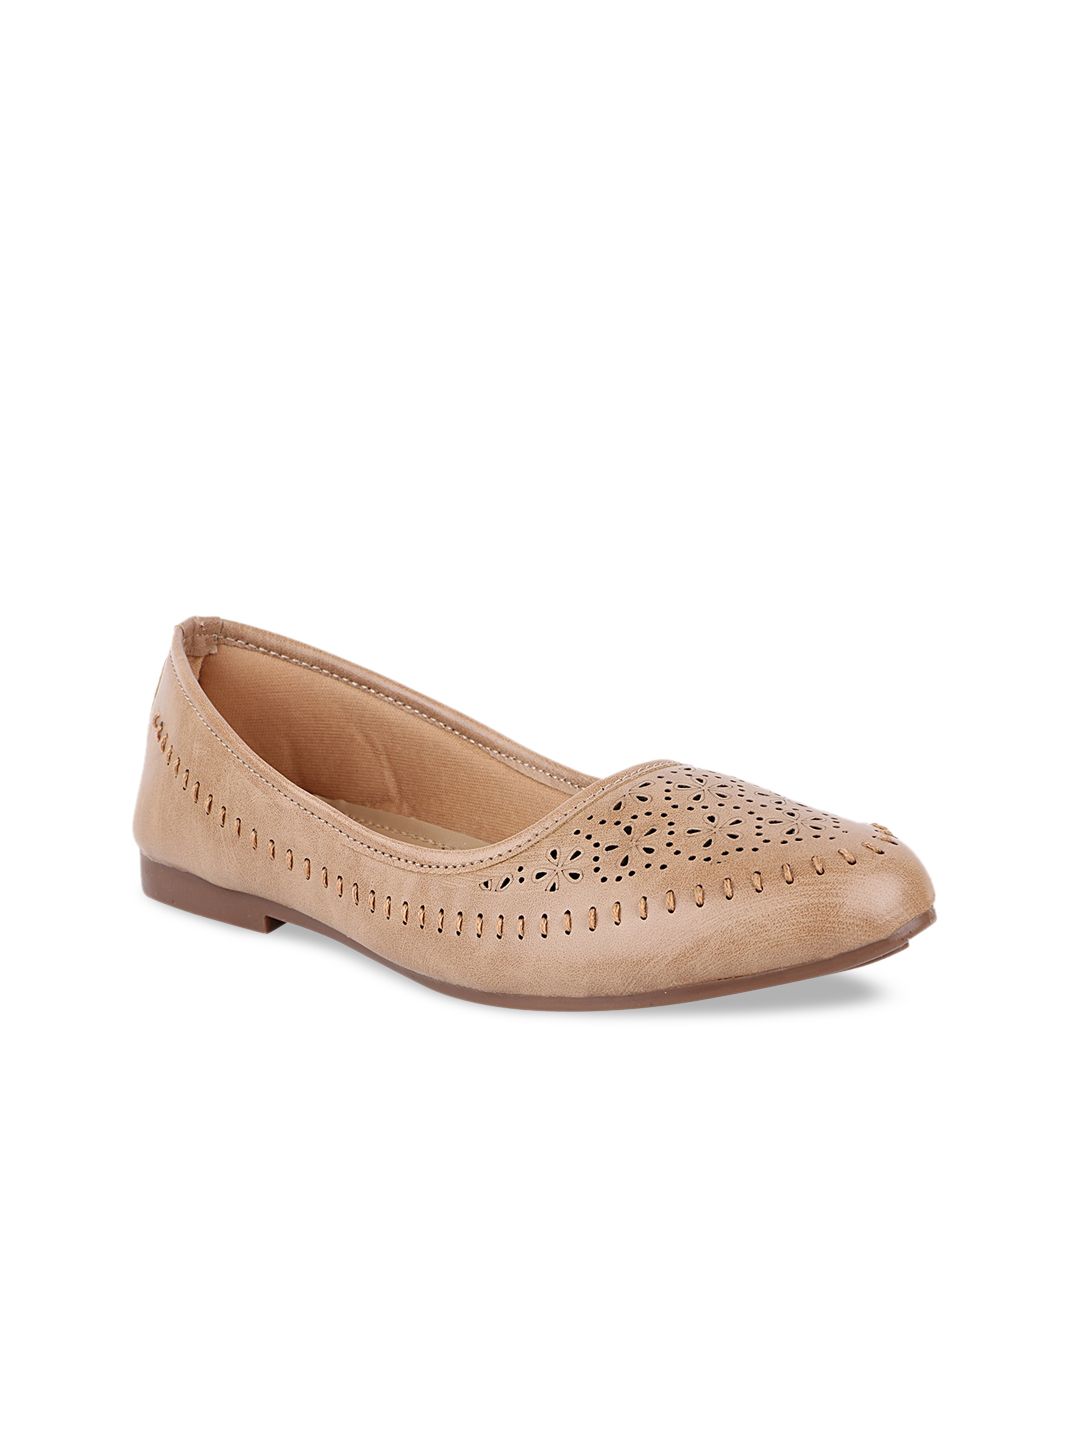 Shoetopia Women Peach-Coloured Ballerinas with Laser Cuts Flats Price in India